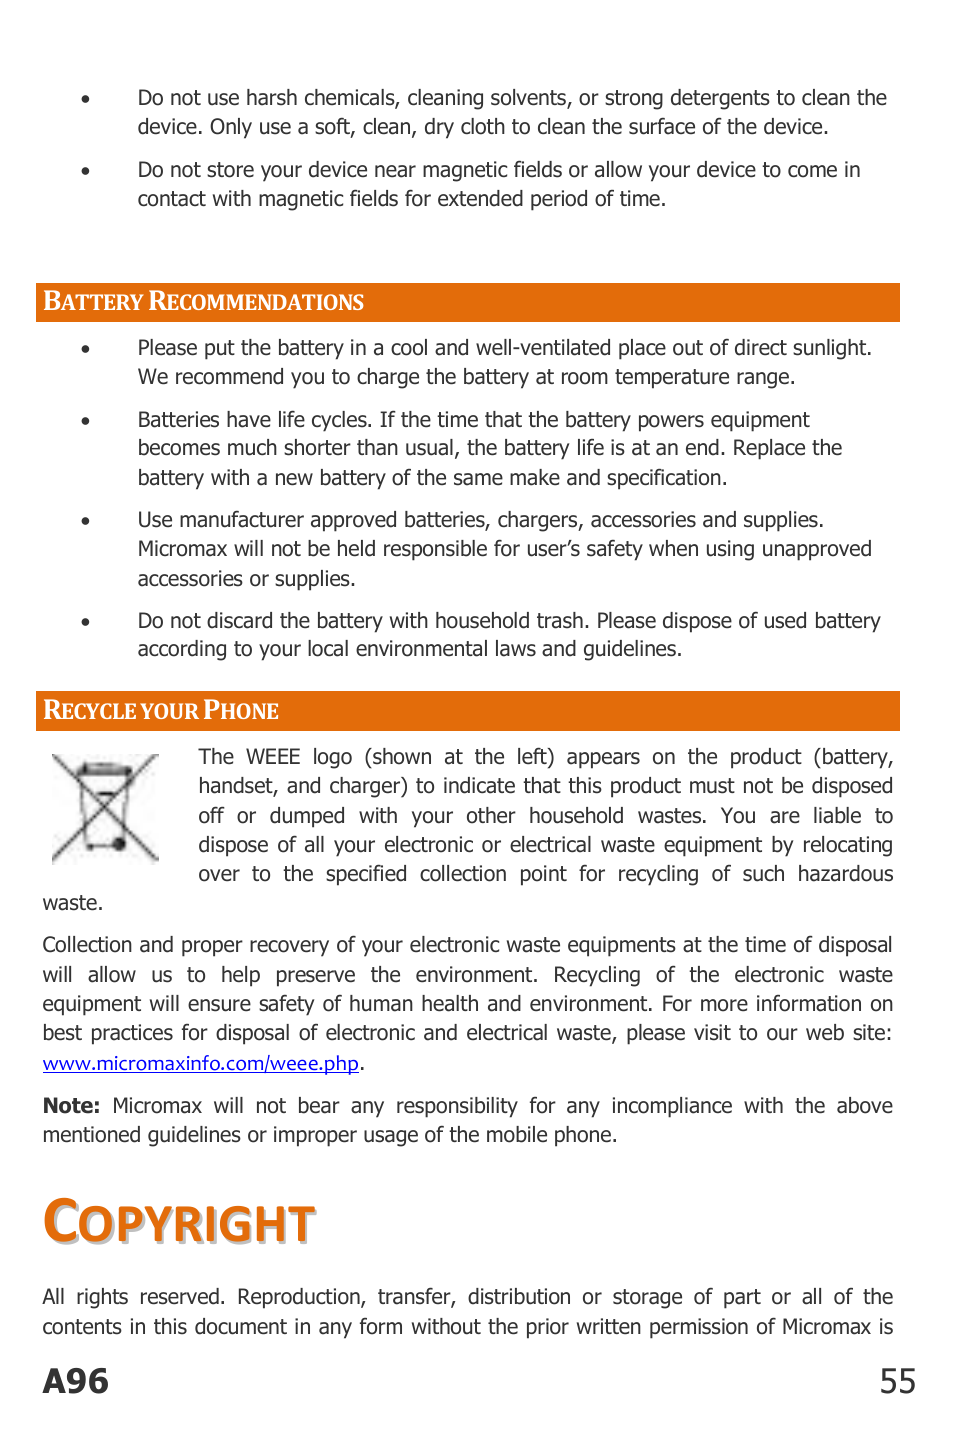 Attery, Ecommendations, Ecycle your | Hone, Opyright | Micromax Canvas Power User Manual | Page 55 / 56